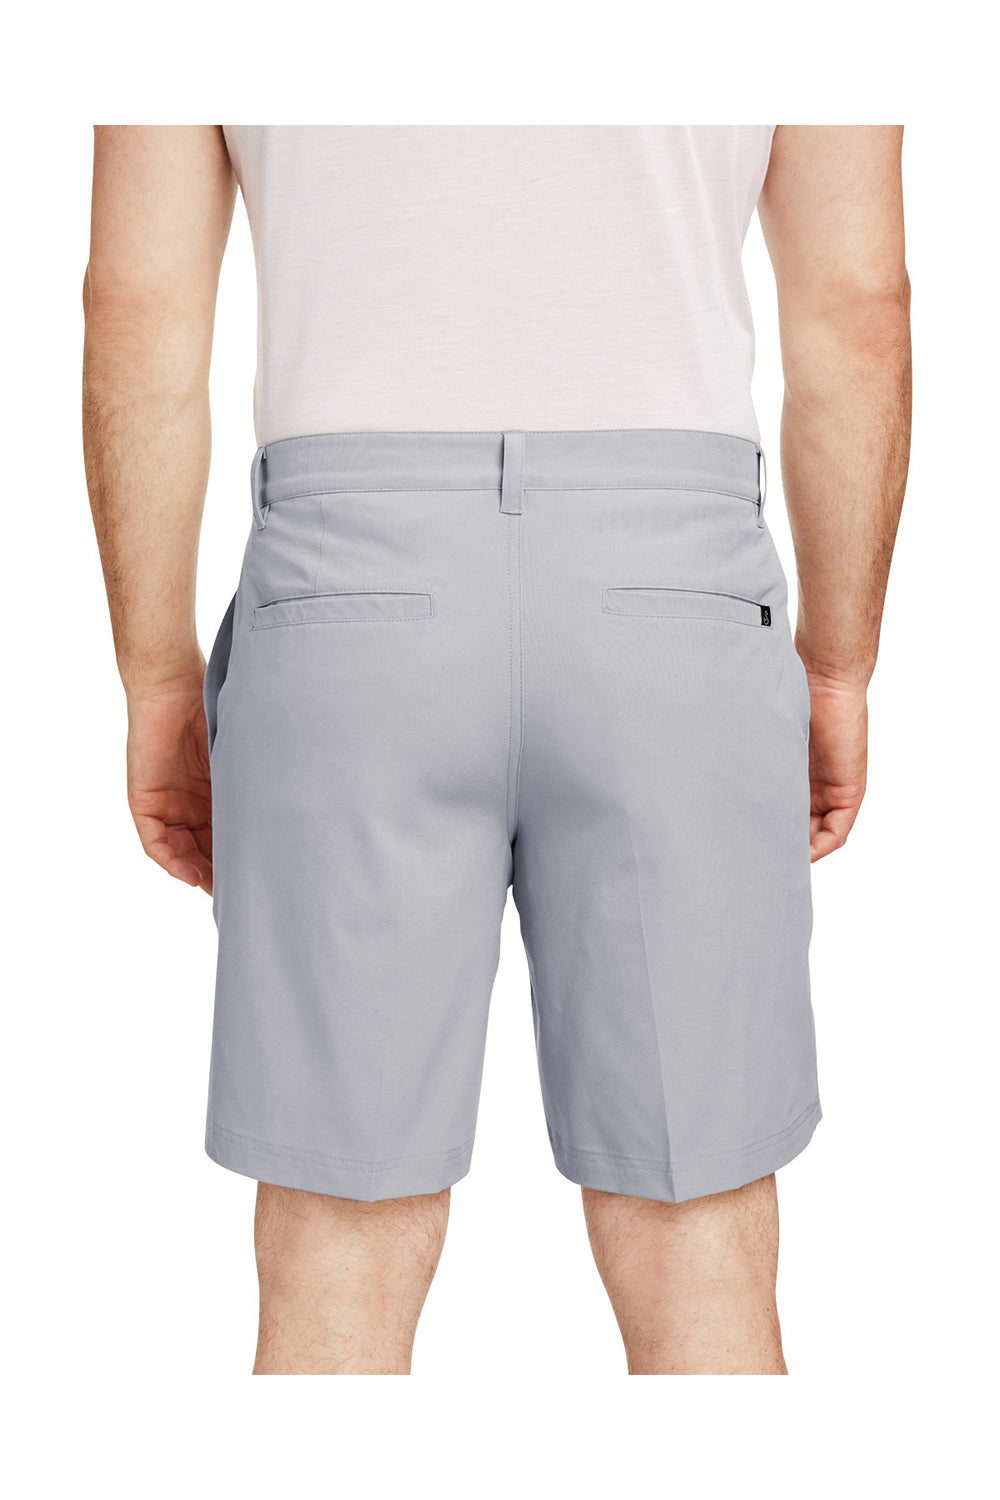 Swannies Golf SWS700 Mens Sully Shorts w/ Pockets Grey Back